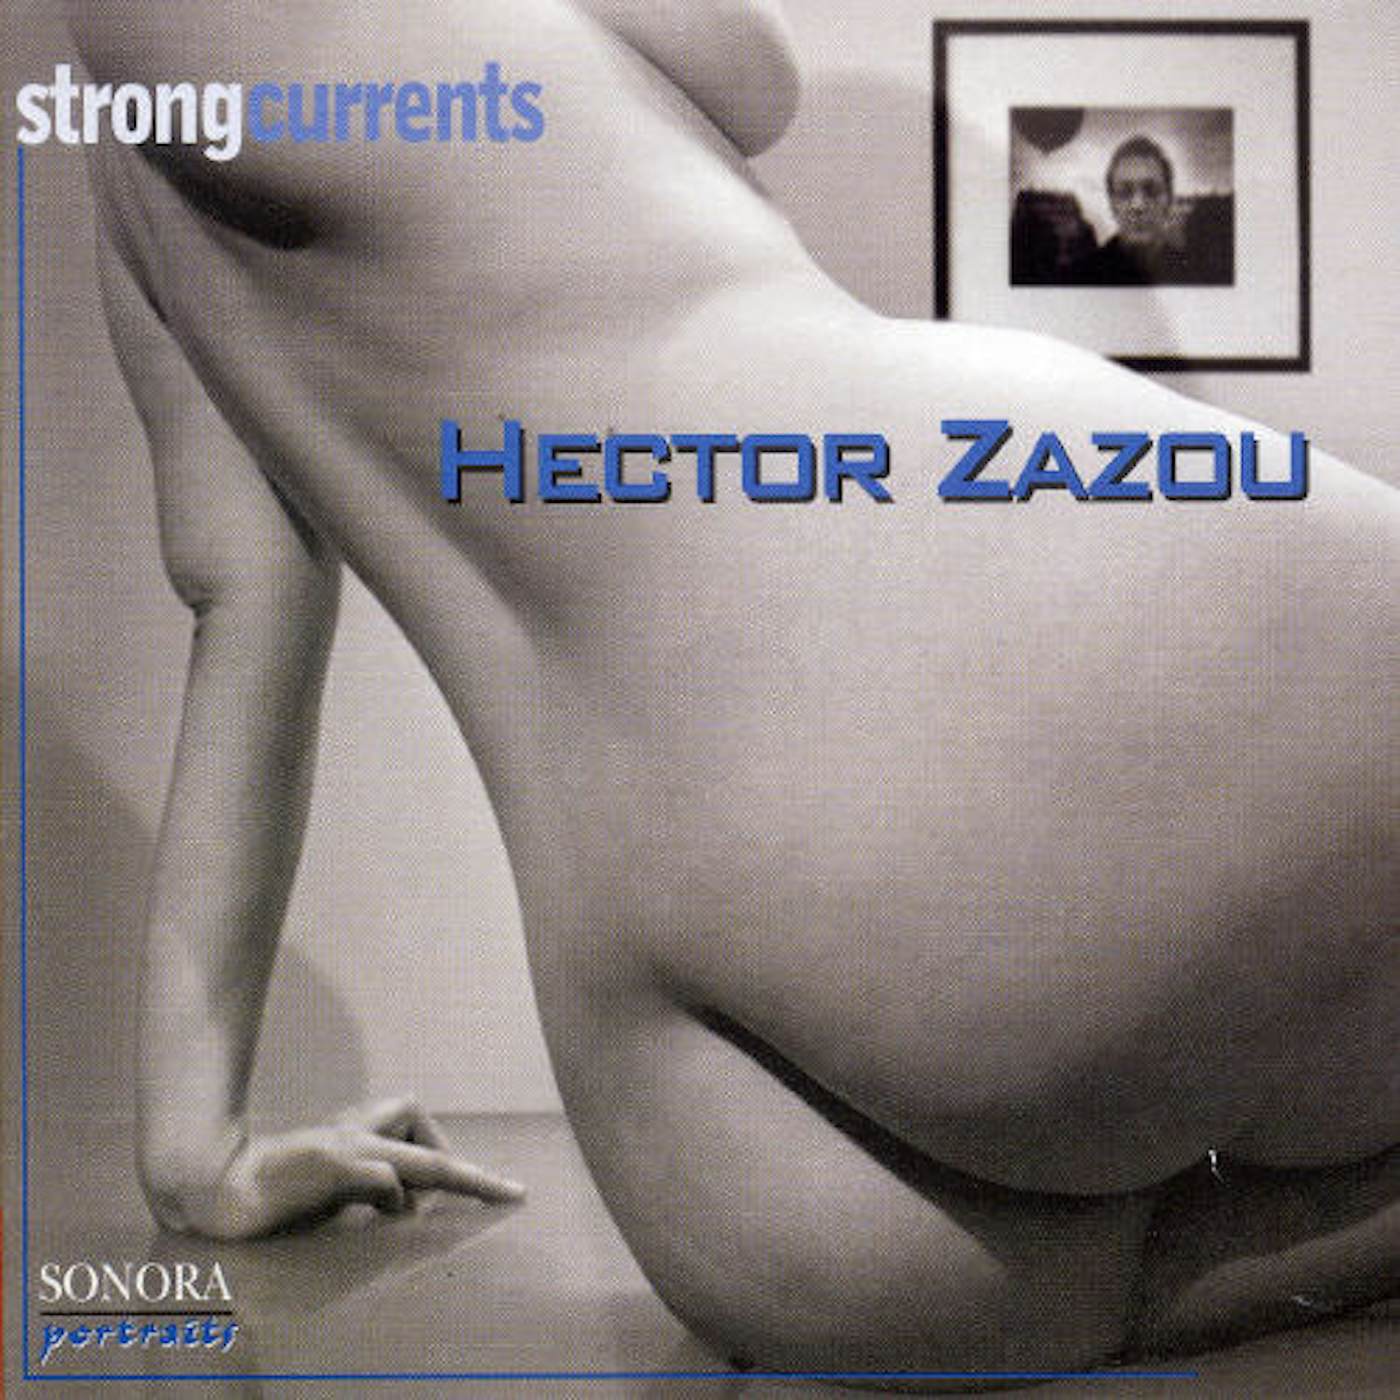 Hector Zazou STRONG CURRENTS CD